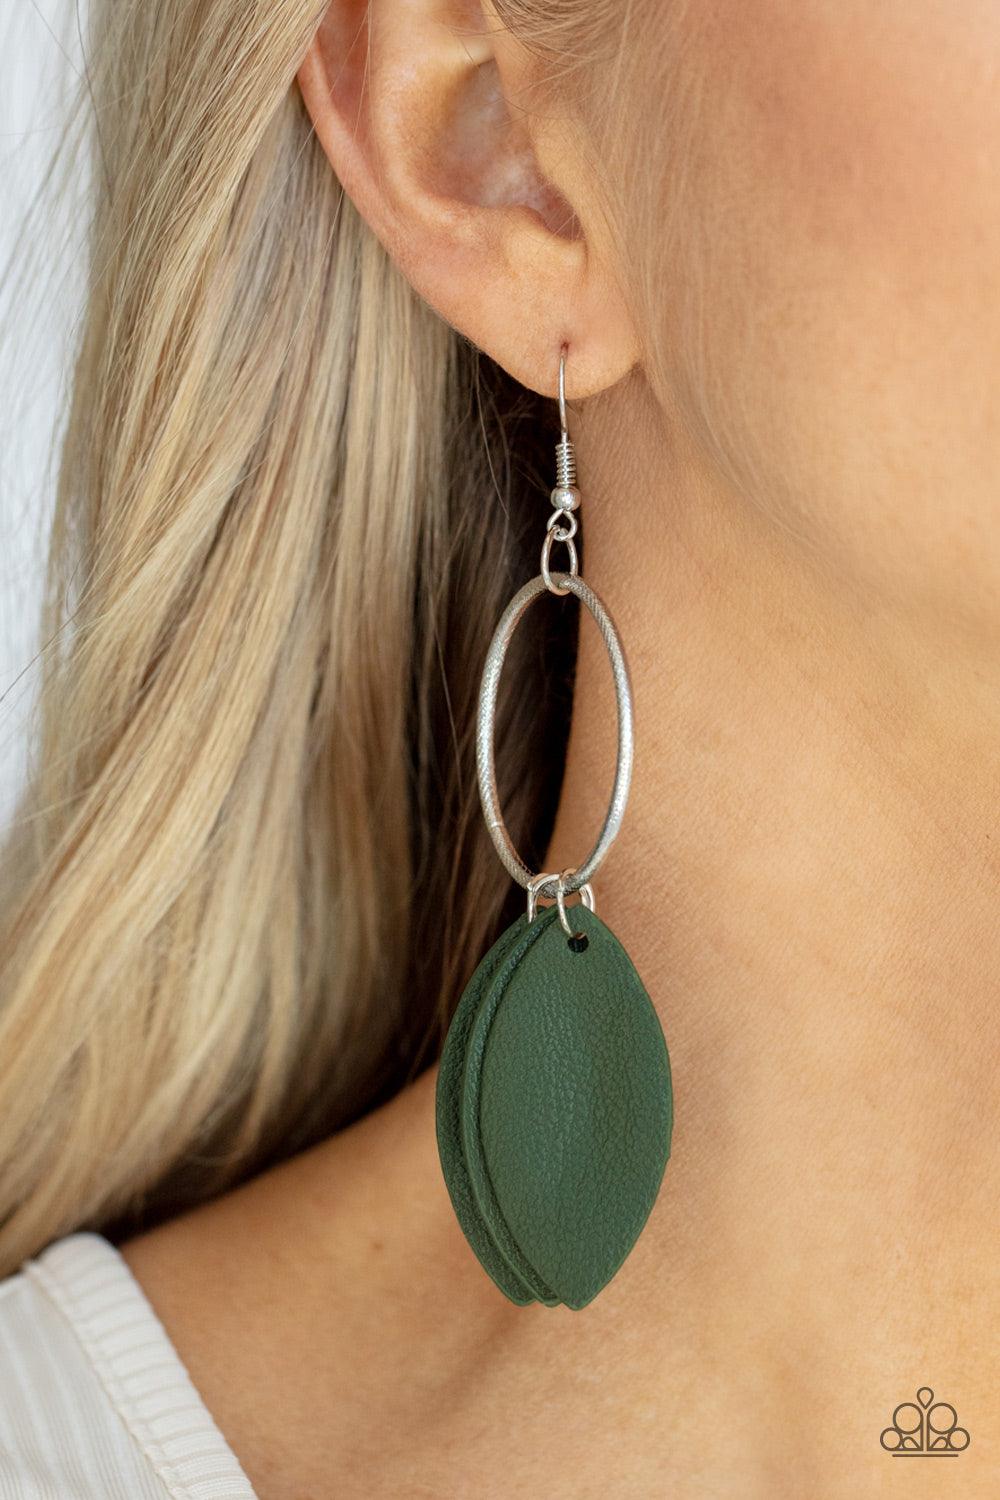 Paparazzi Accessories Leafy Laguna - Green Leafy green leather frames swing from the bottom of a textured silver hoop, creating an earthy fringe. Earring attaches to a standard fishhook fitting. Sold as one pair of earrings. Jewelry